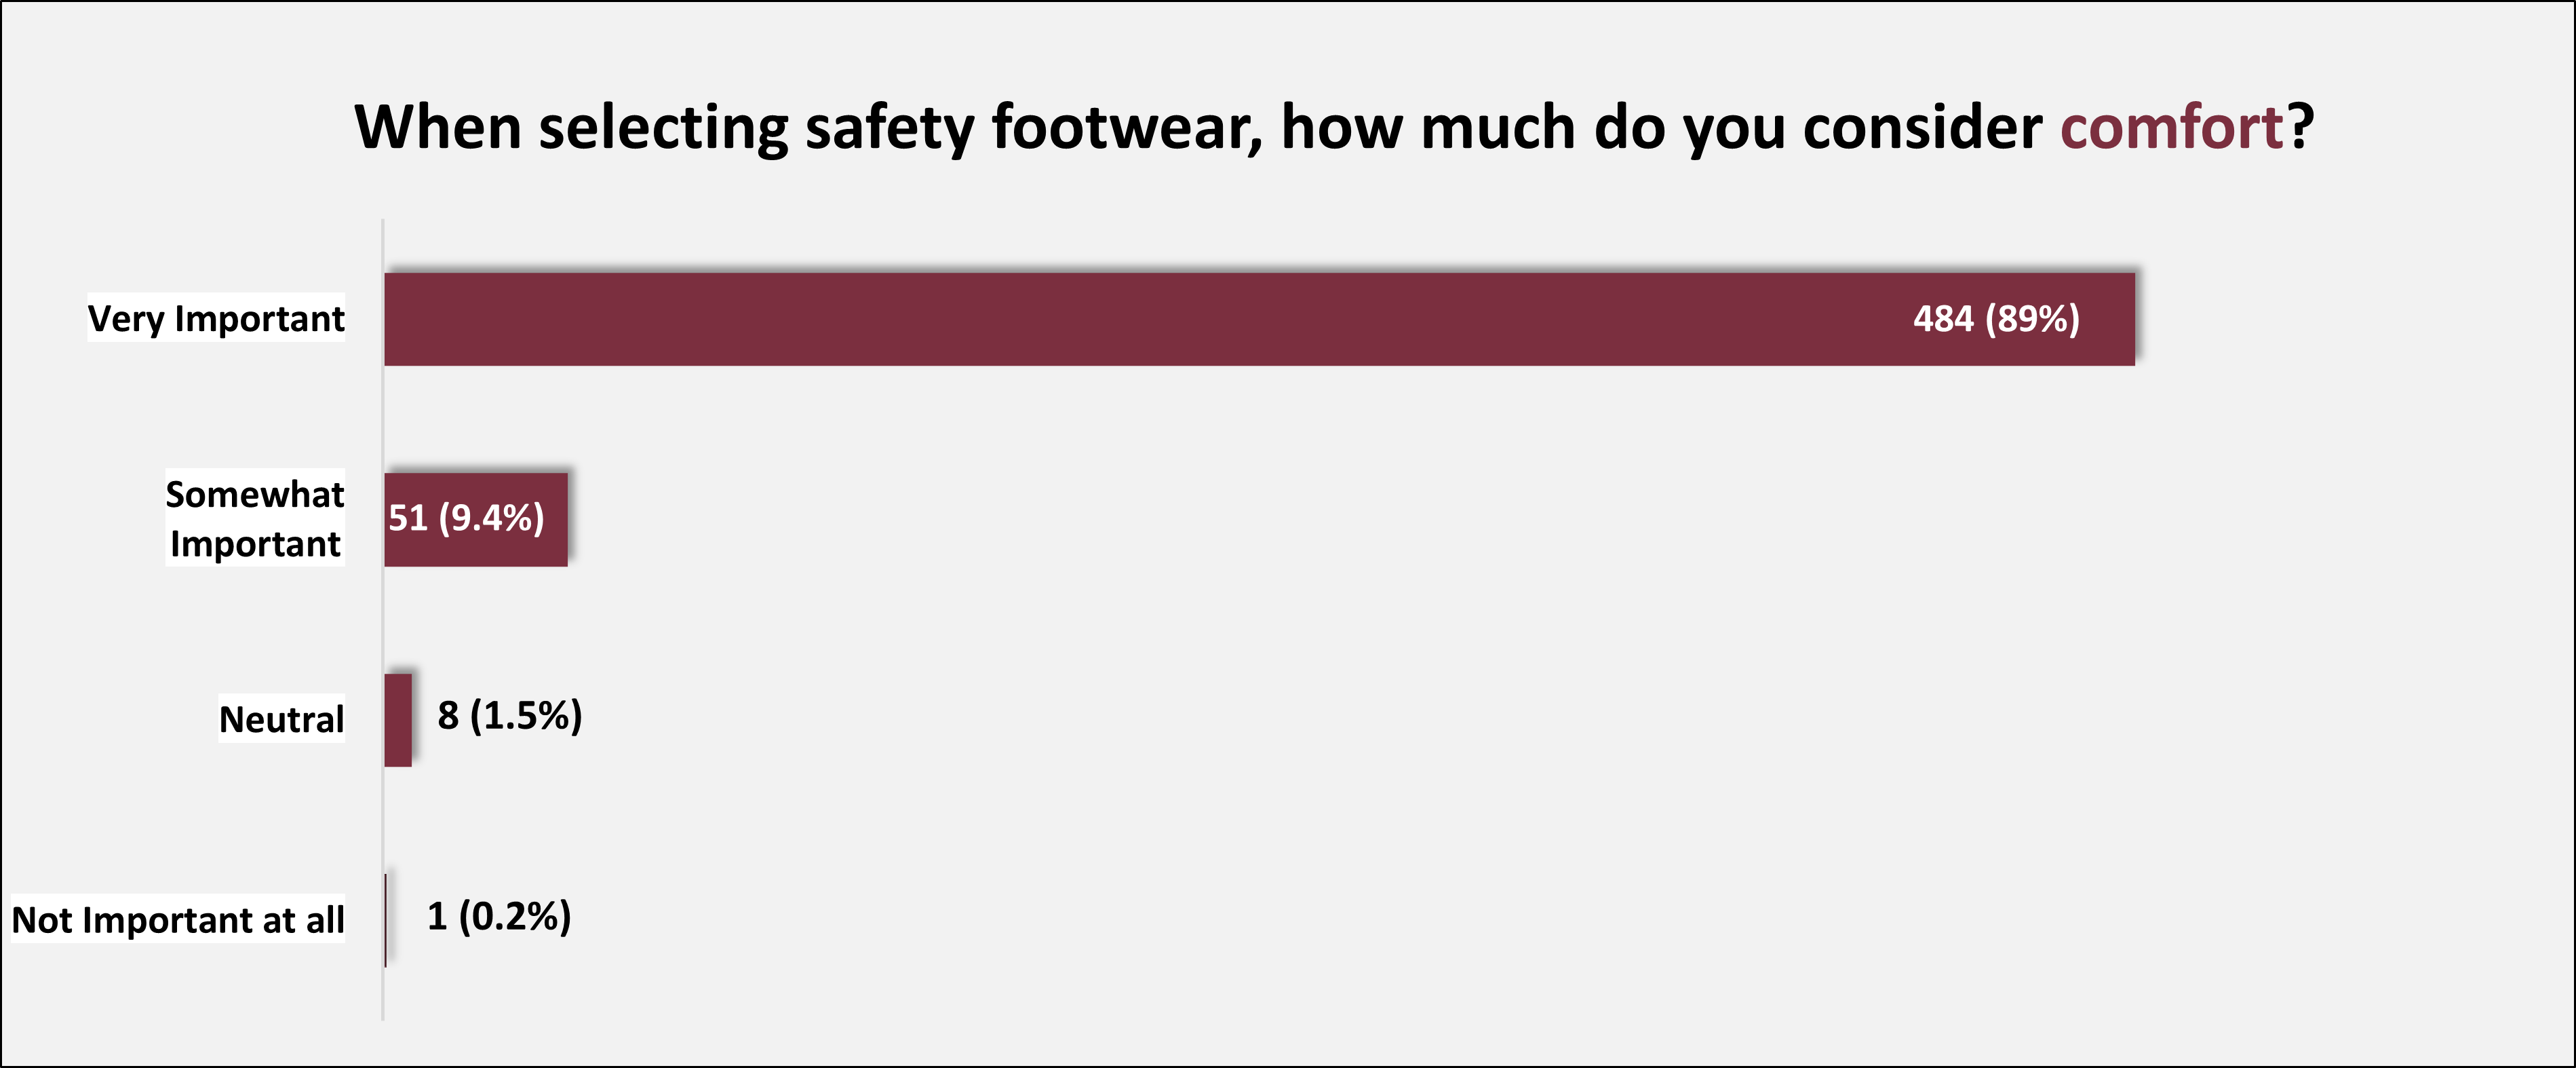 What factors drive safety boot purchases (comfort)